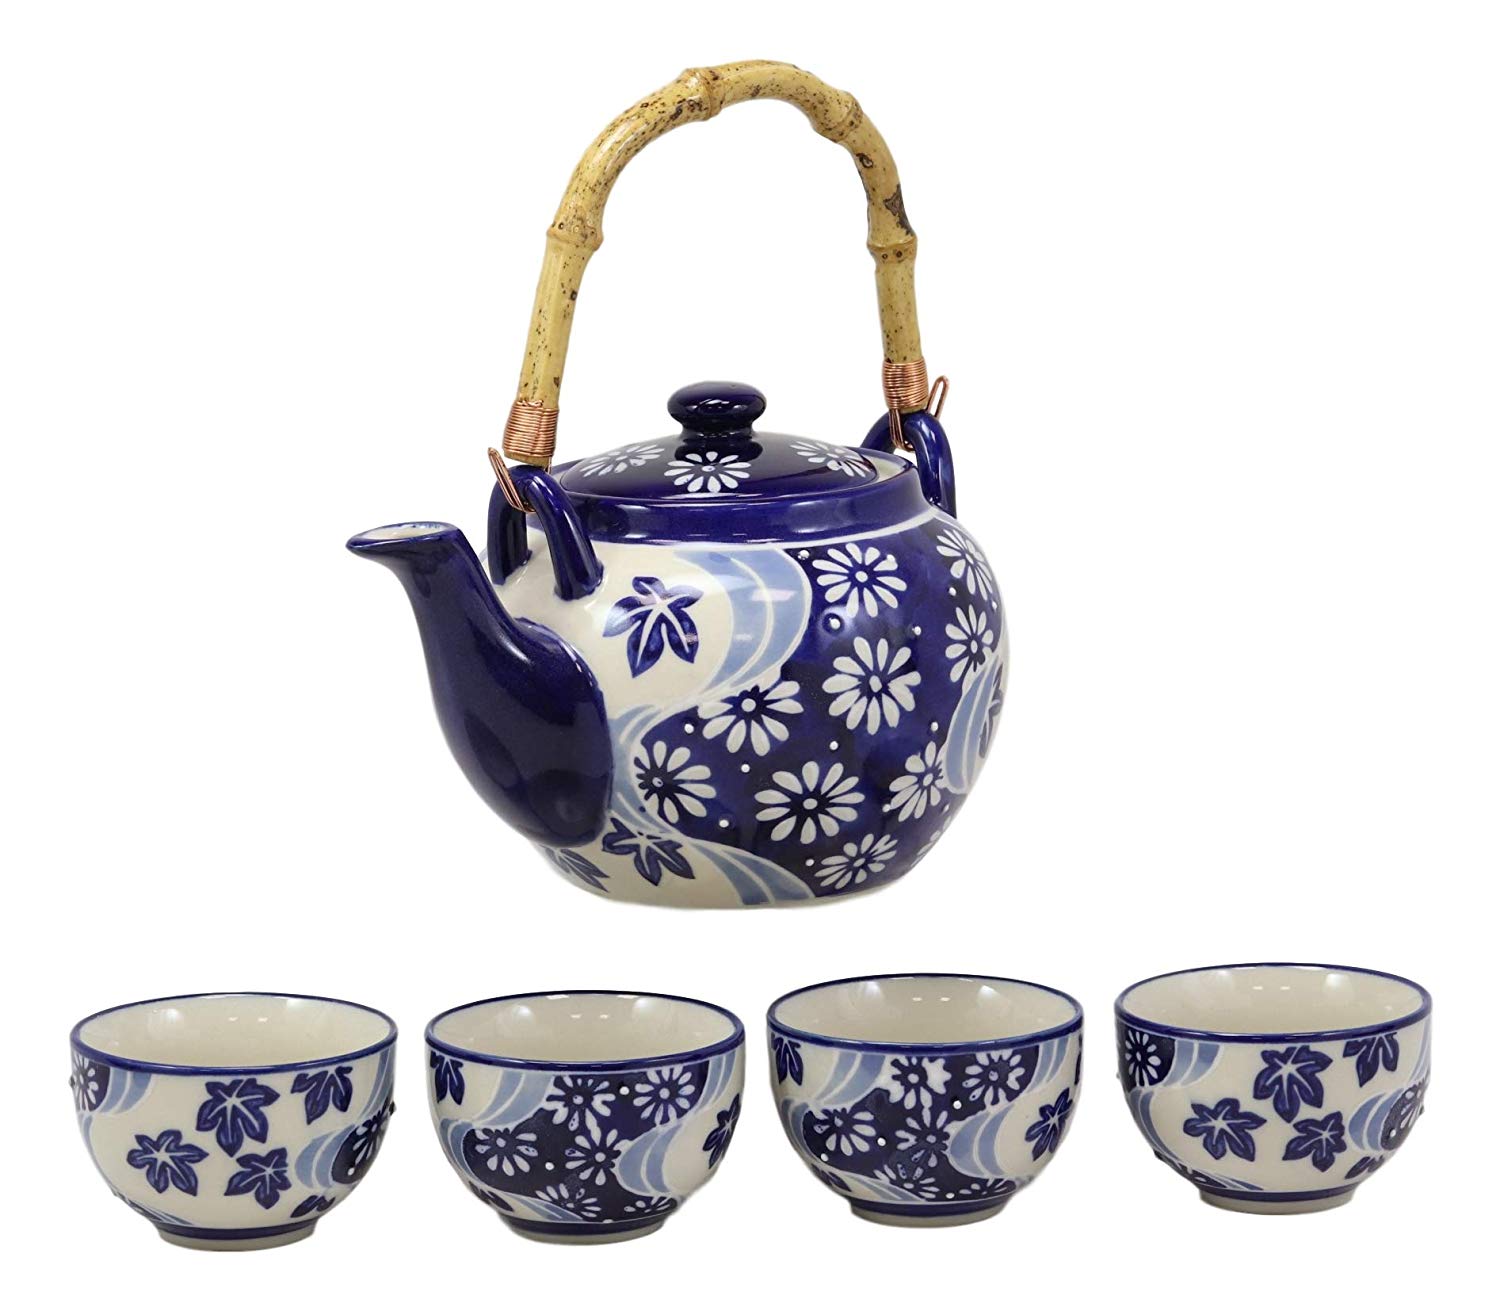 Chrysanthemum Autumn Colorful Large Floral Blooms 25oz Tea Pot With 4 Cups Set - image 2 of 7